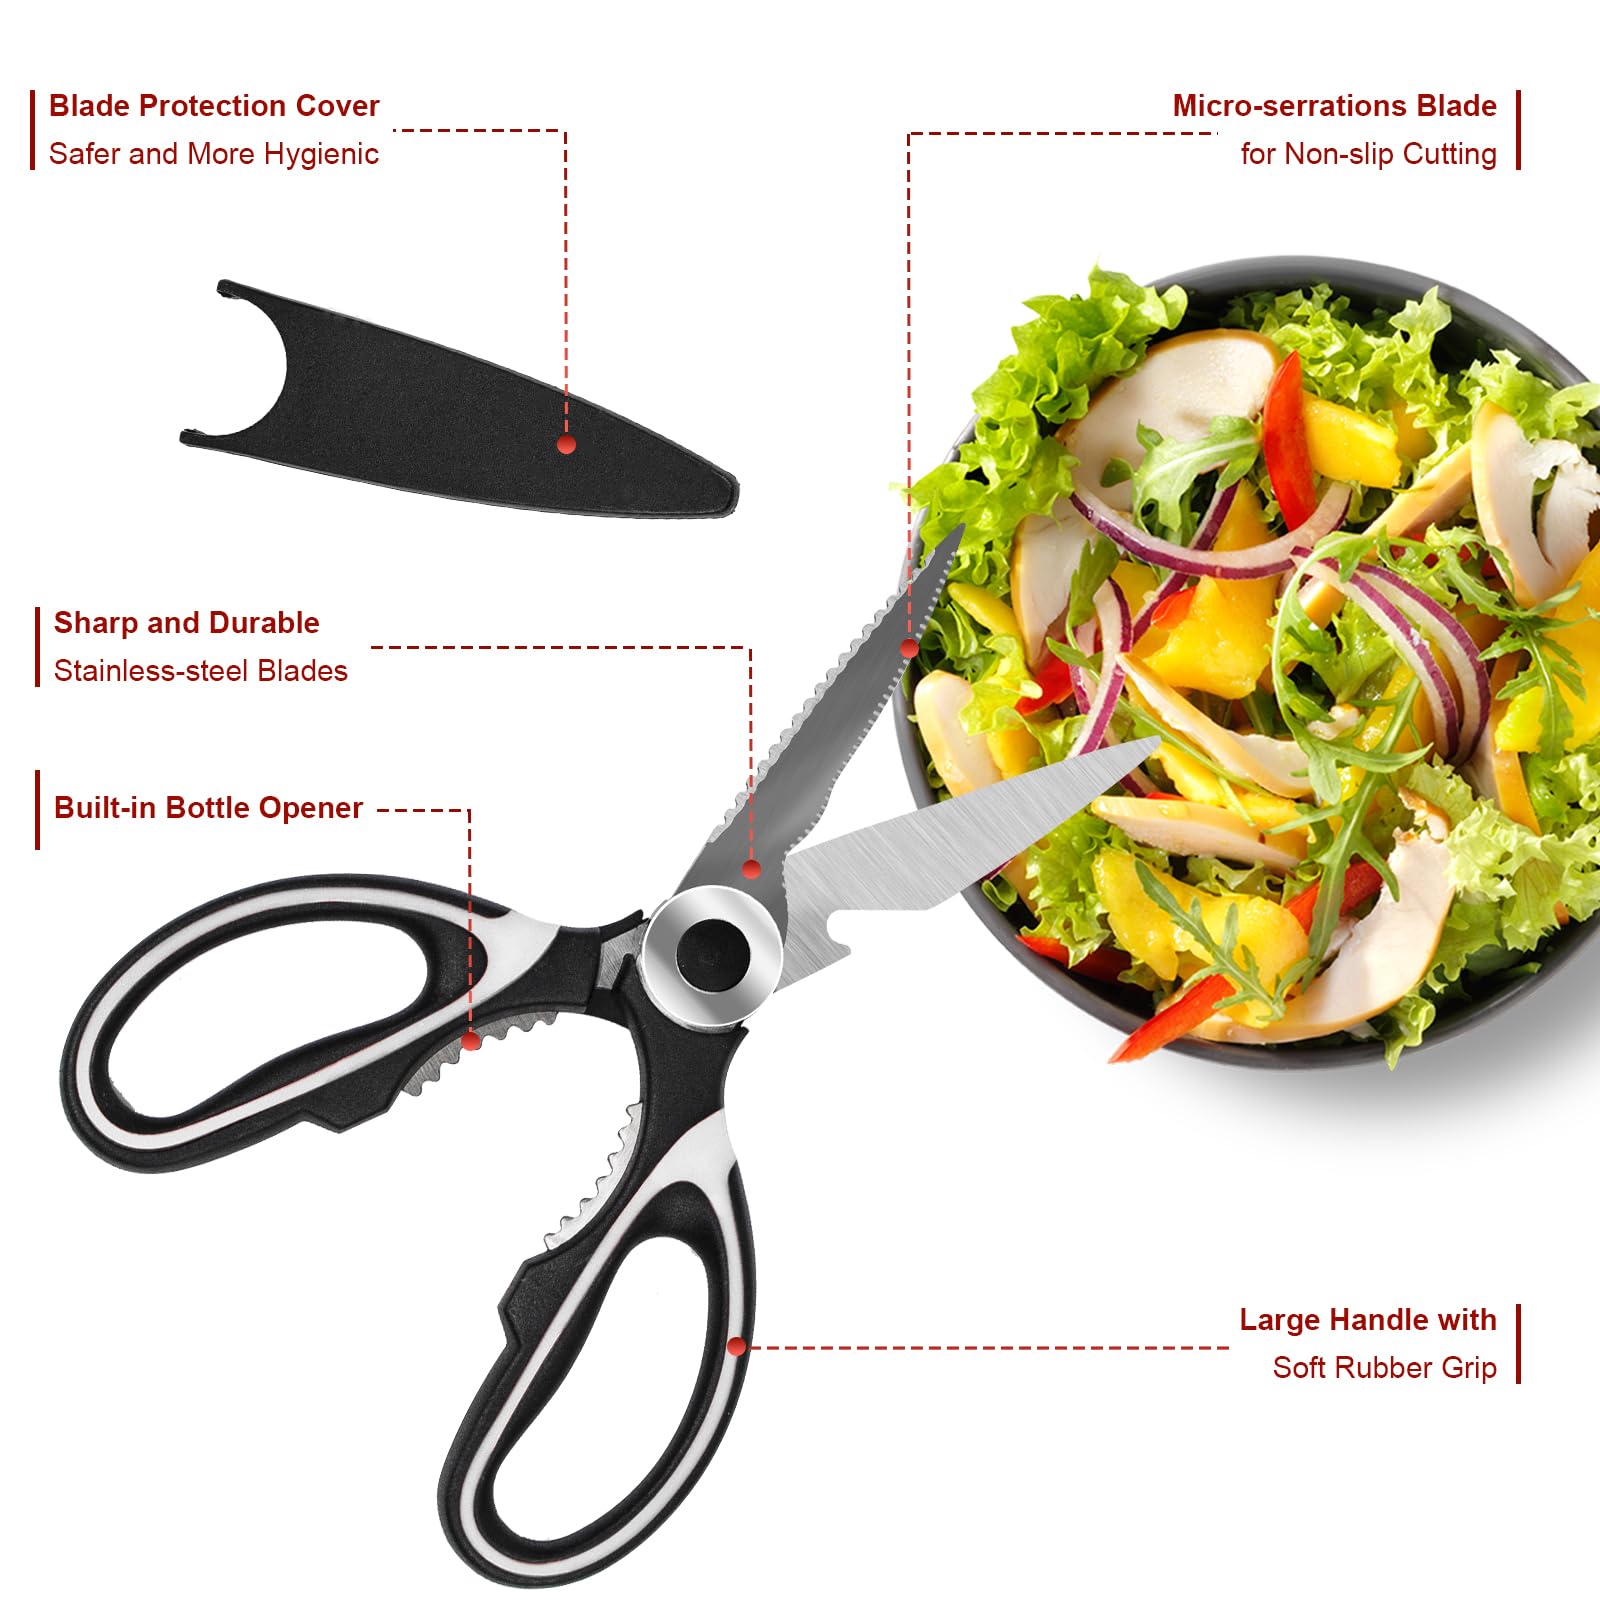 SZHLUX 2-Pack Kitchen Scissors Heavy Duty, Premium Sharp Kitchen Shears for Food, Fish, Meat, Bones, Poultry and Vegetables with Strong Stainless Steel Blades Multi Purpose Cooking Scissors